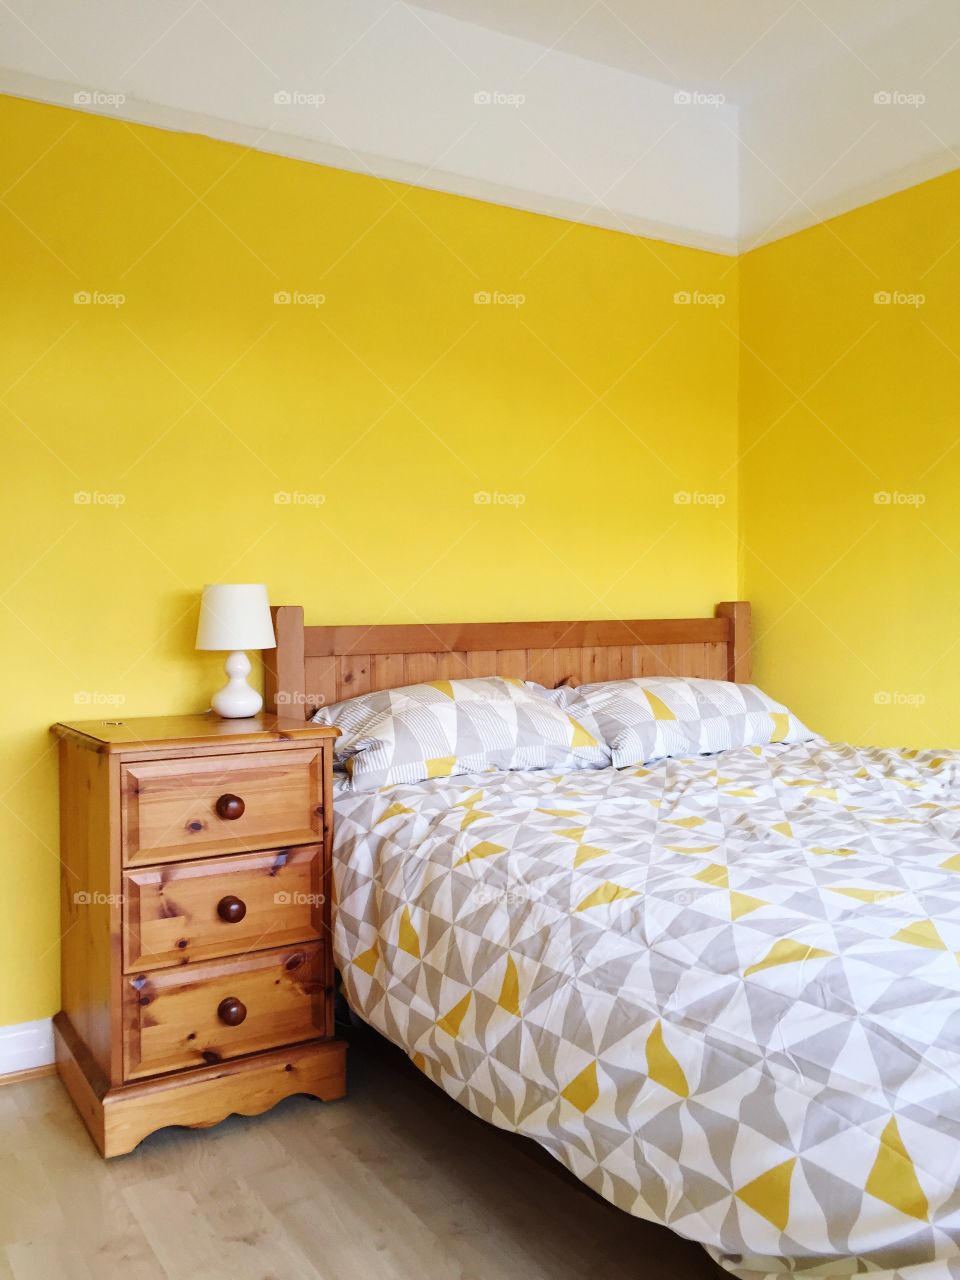 A double bed in a yellow bedroom